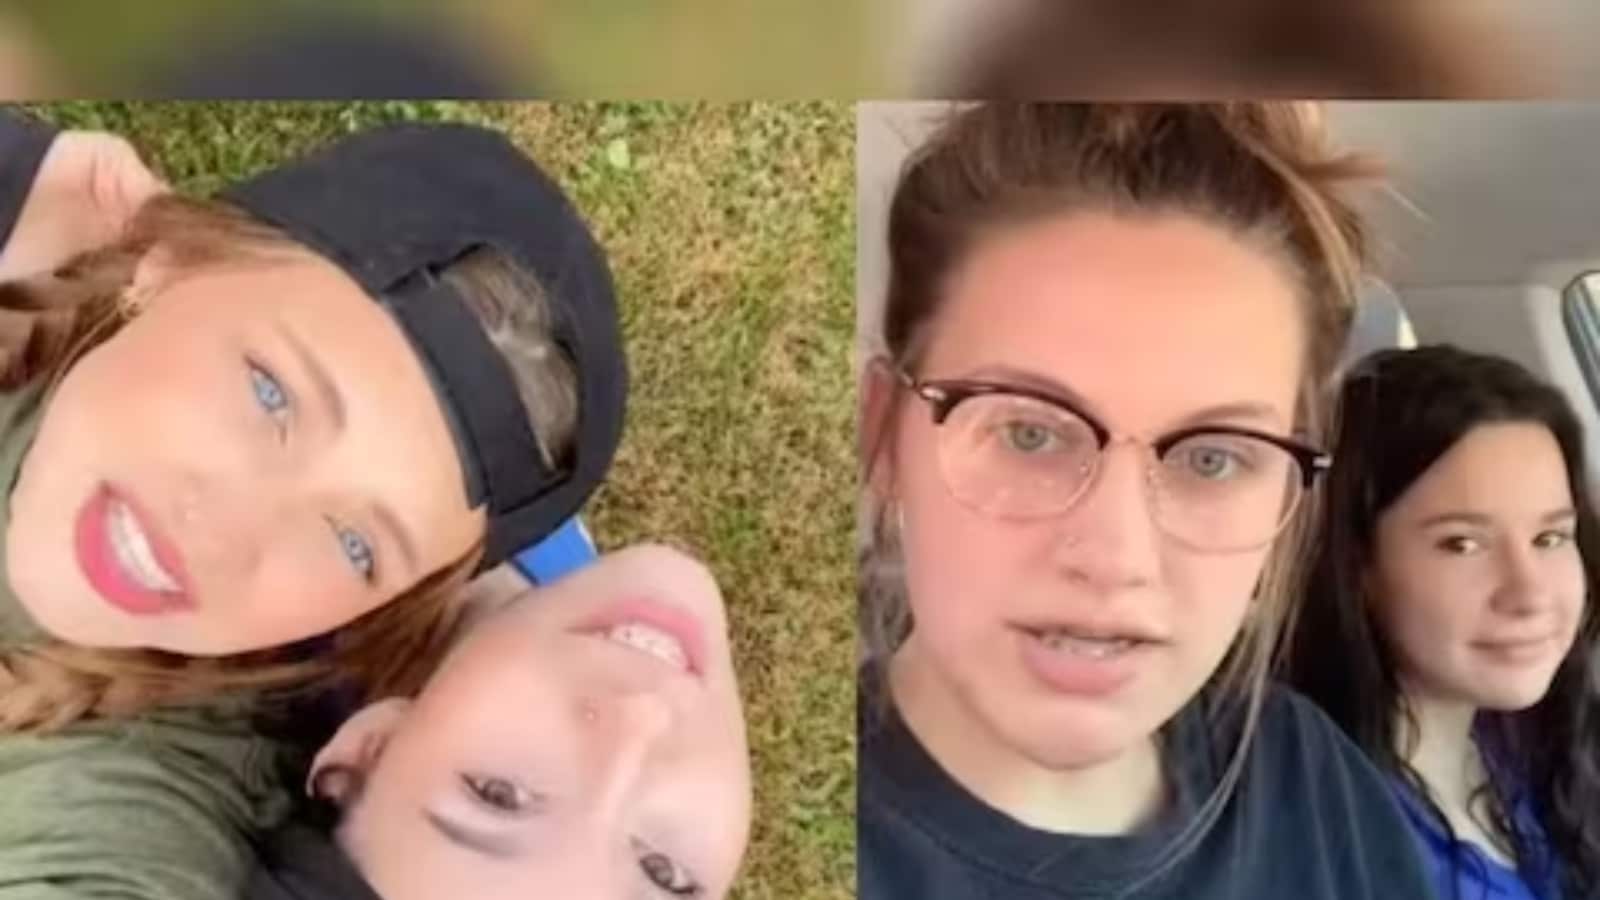 21-Year-Old Becomes Parent To 15-Year-Old And Has Her Users Puzzled On TikTok